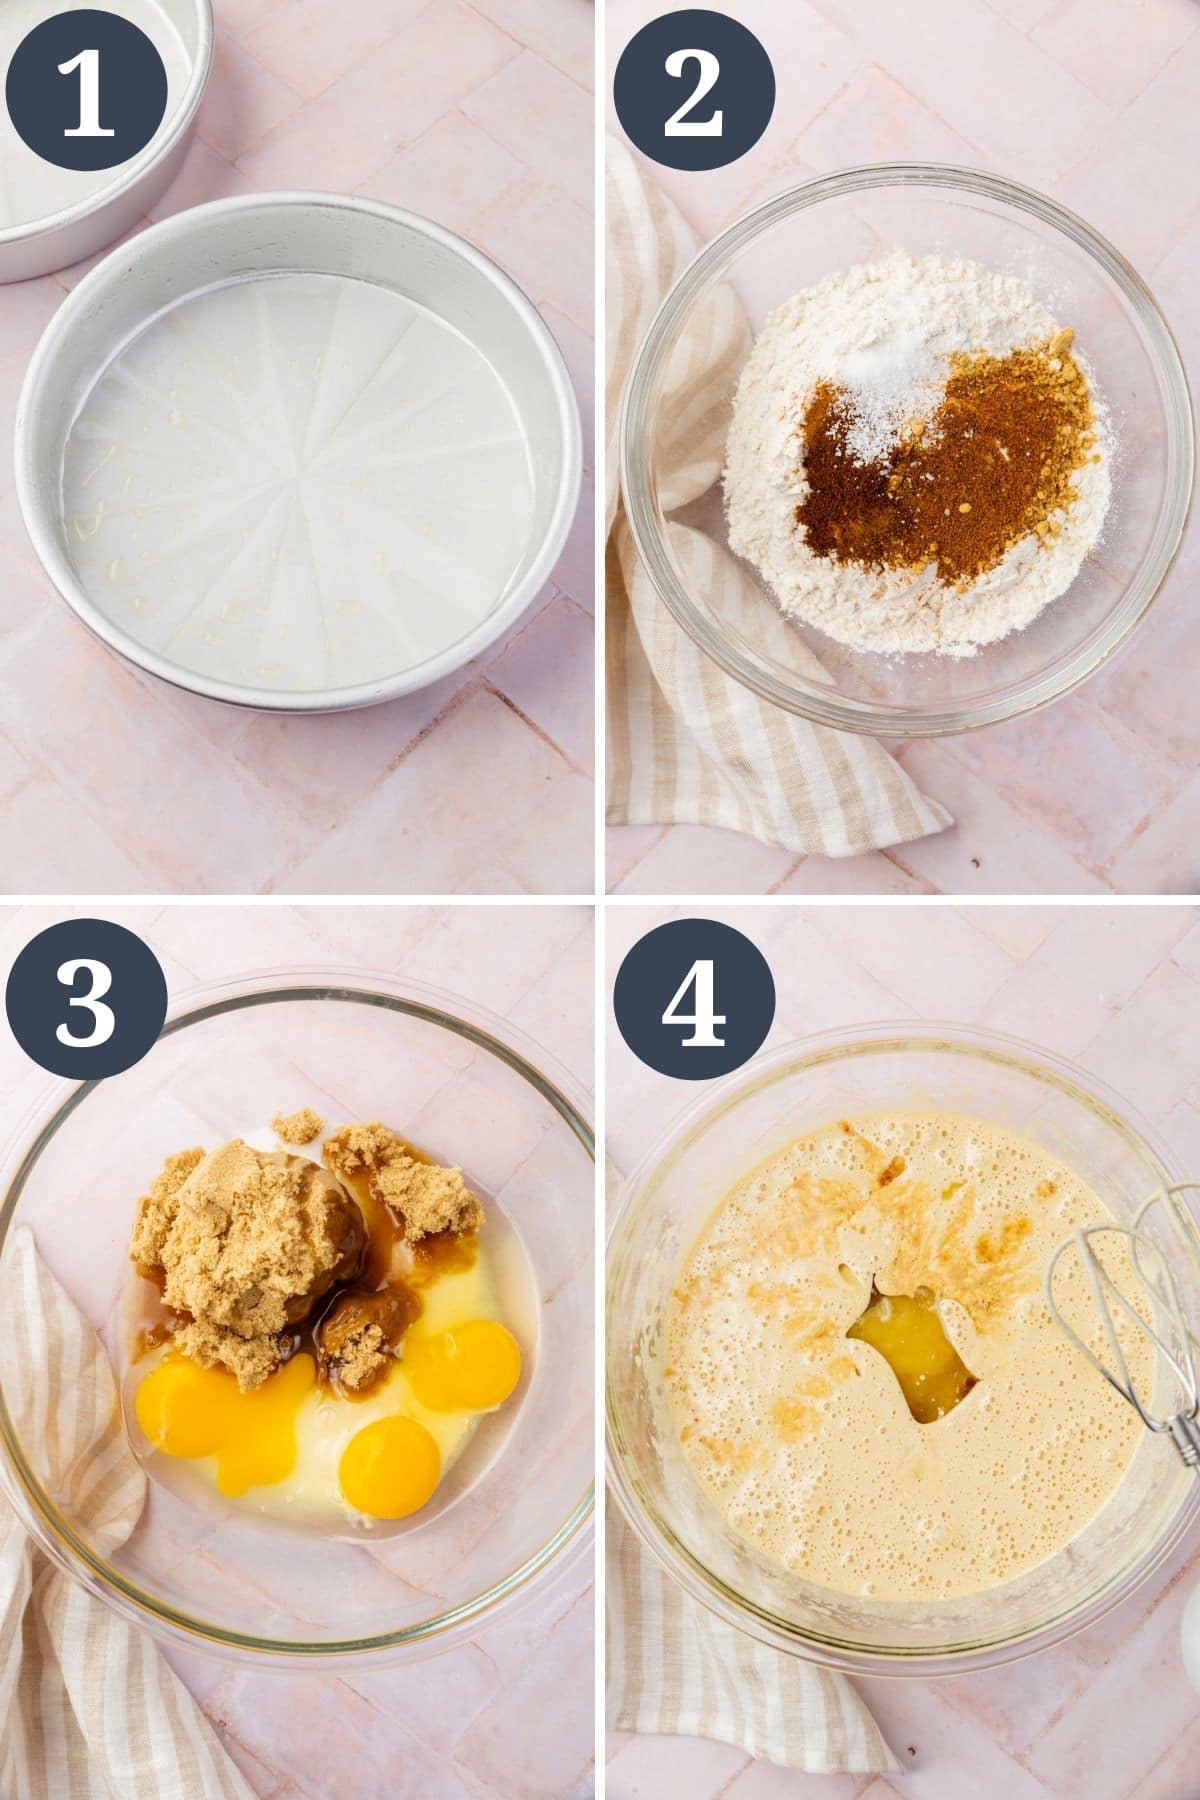 A collage showing the first steps to make carrot cake: line a round baking pan, add dry ingredients to a mixing bowl, add wet ingredients to a mixing bowl, blend wet ingredients with applesauce and oil. 